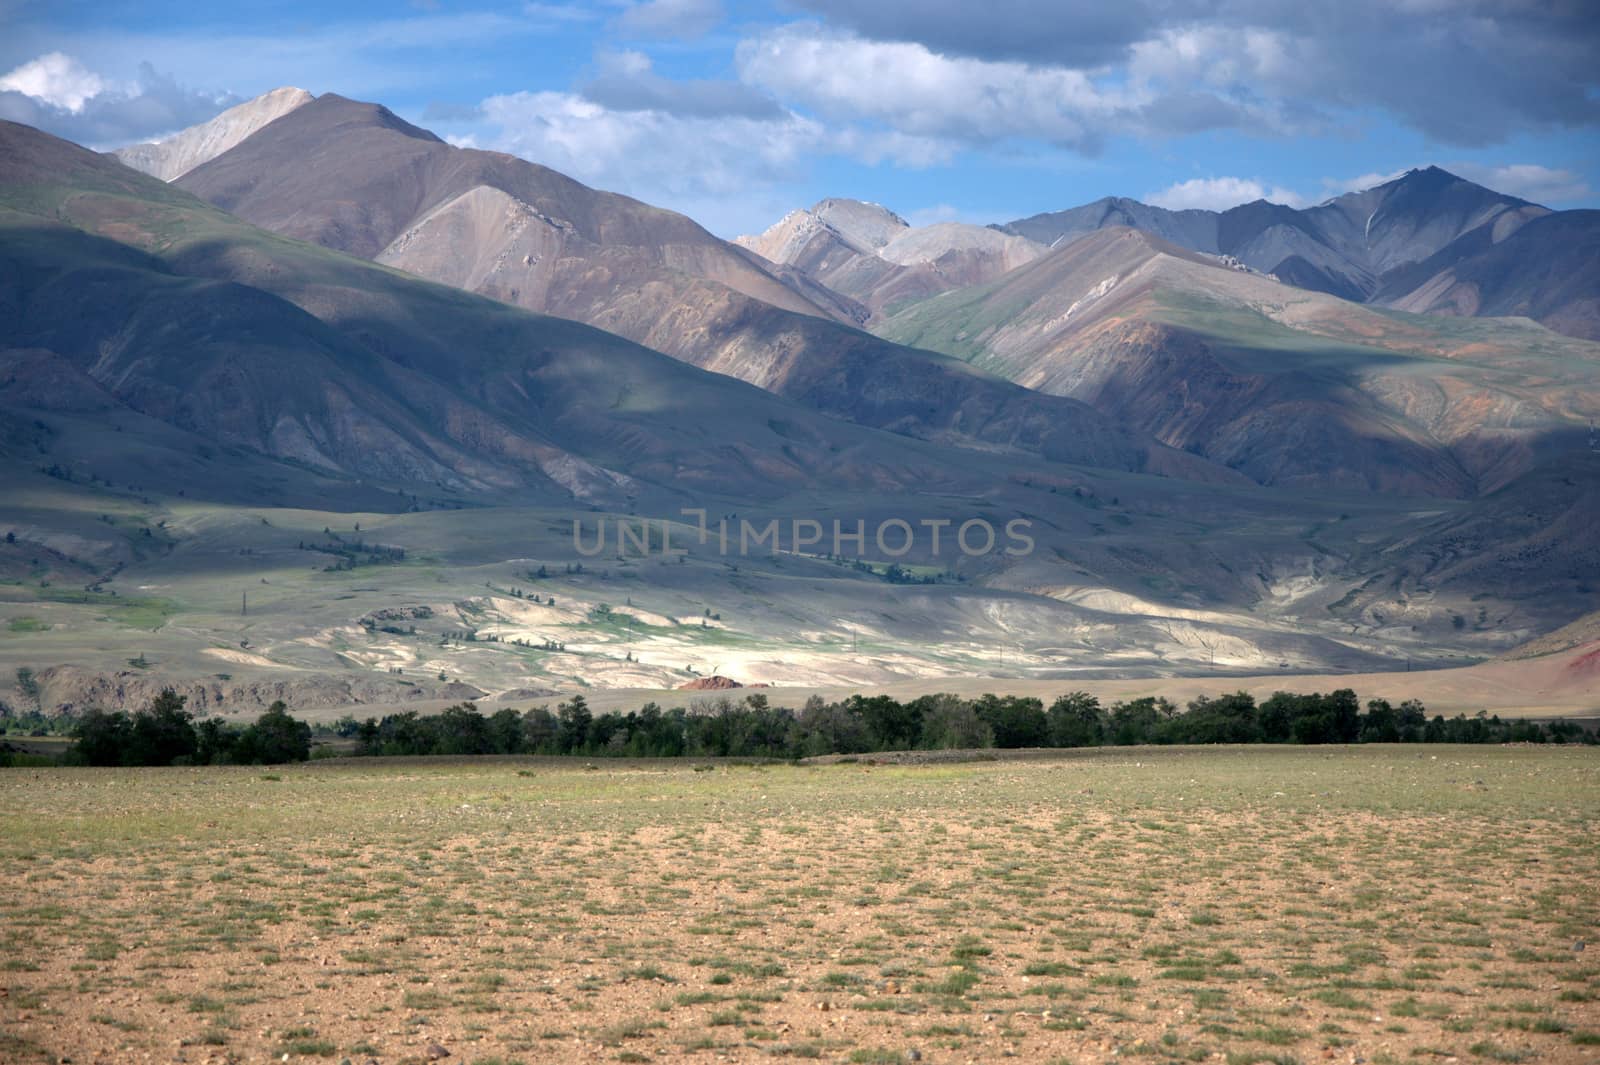 Desert steppe at the foot of the red mountains. The tract Chagan-Uzun, Martian landscapes, Altai, Siberia, Russia.